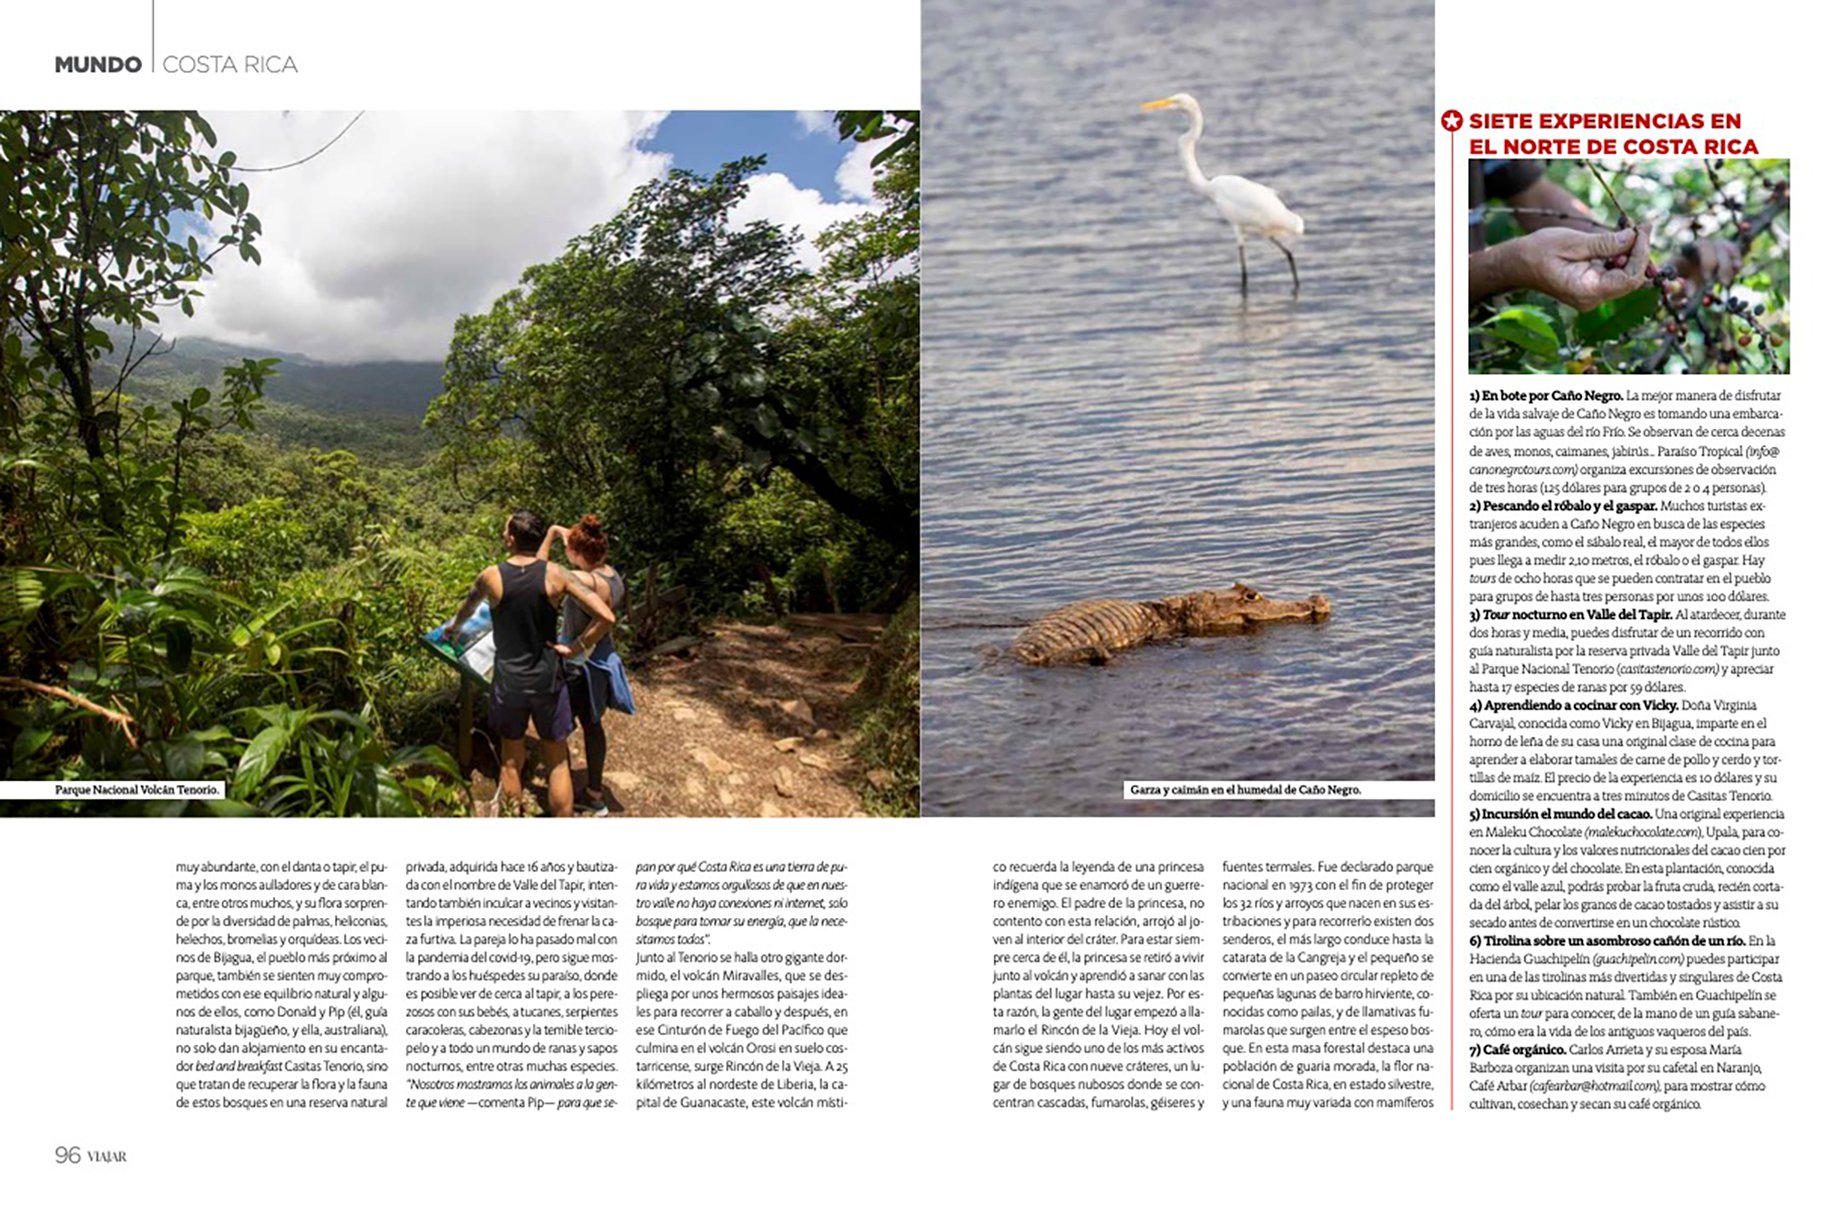 Tear sheet of Viajar magazine feature on Costa Rica shot by Cristina Candel